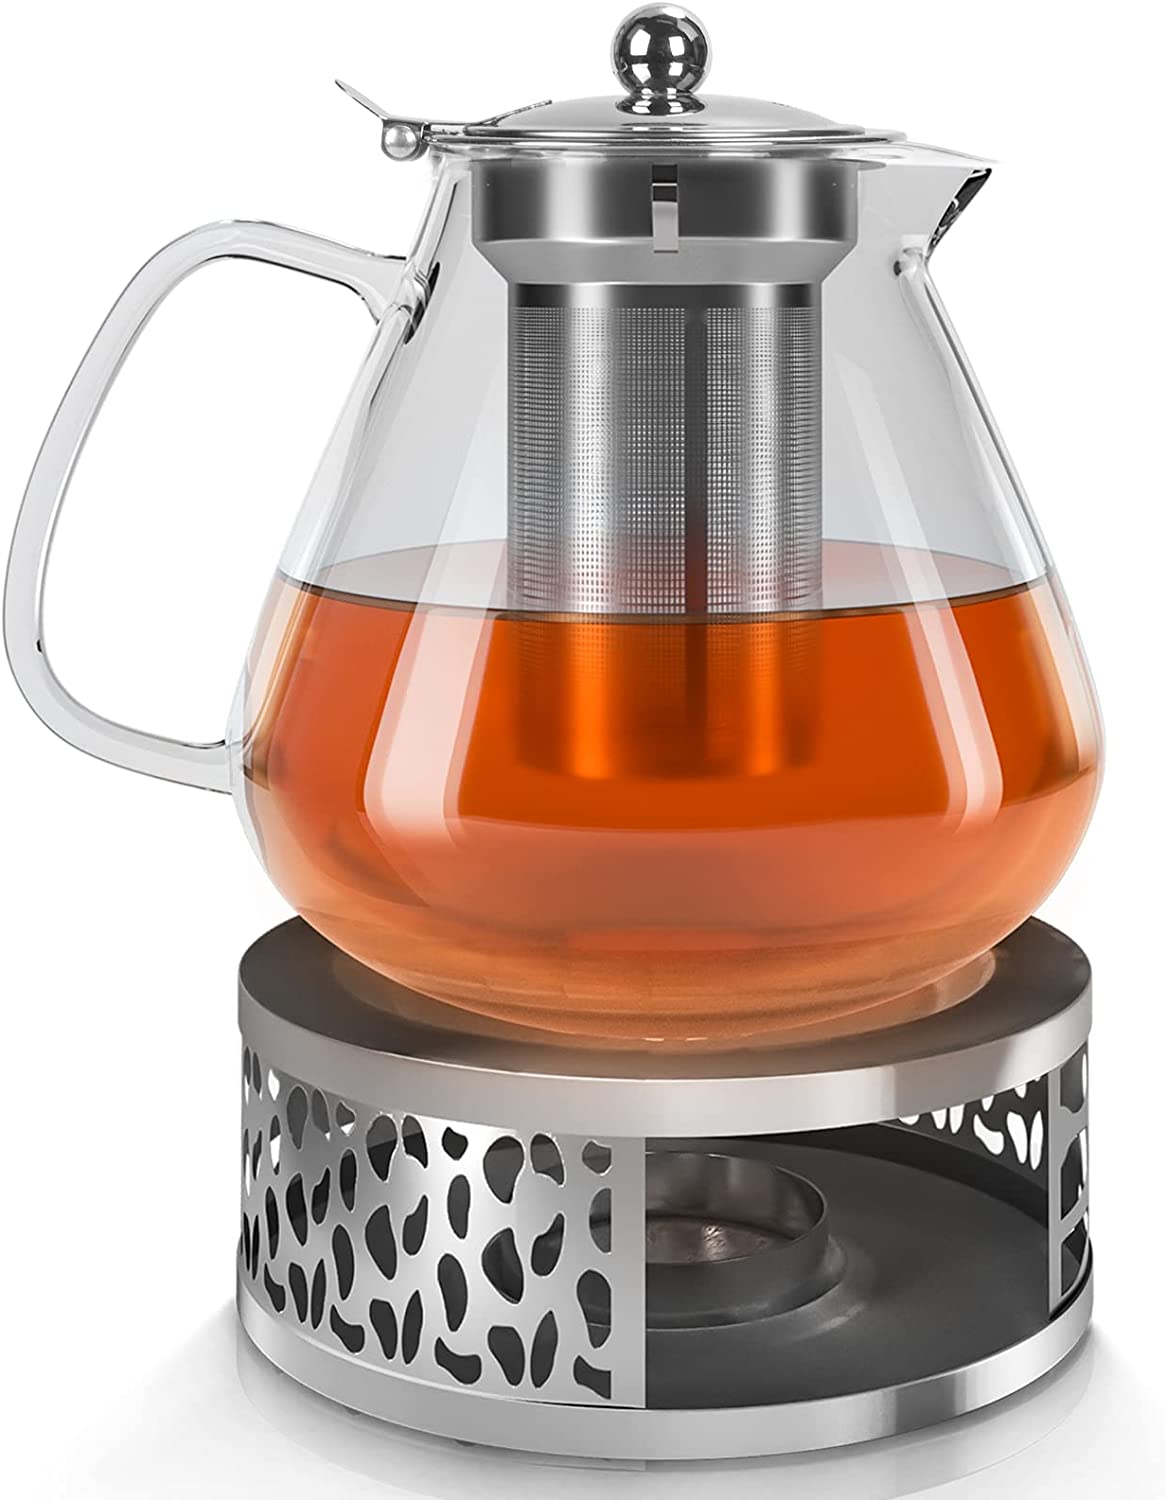 FMK Teapot Glass Tea Maker 1500 ml with Removable Stainless Steel Strainer Glass Jug Heating on the Stove